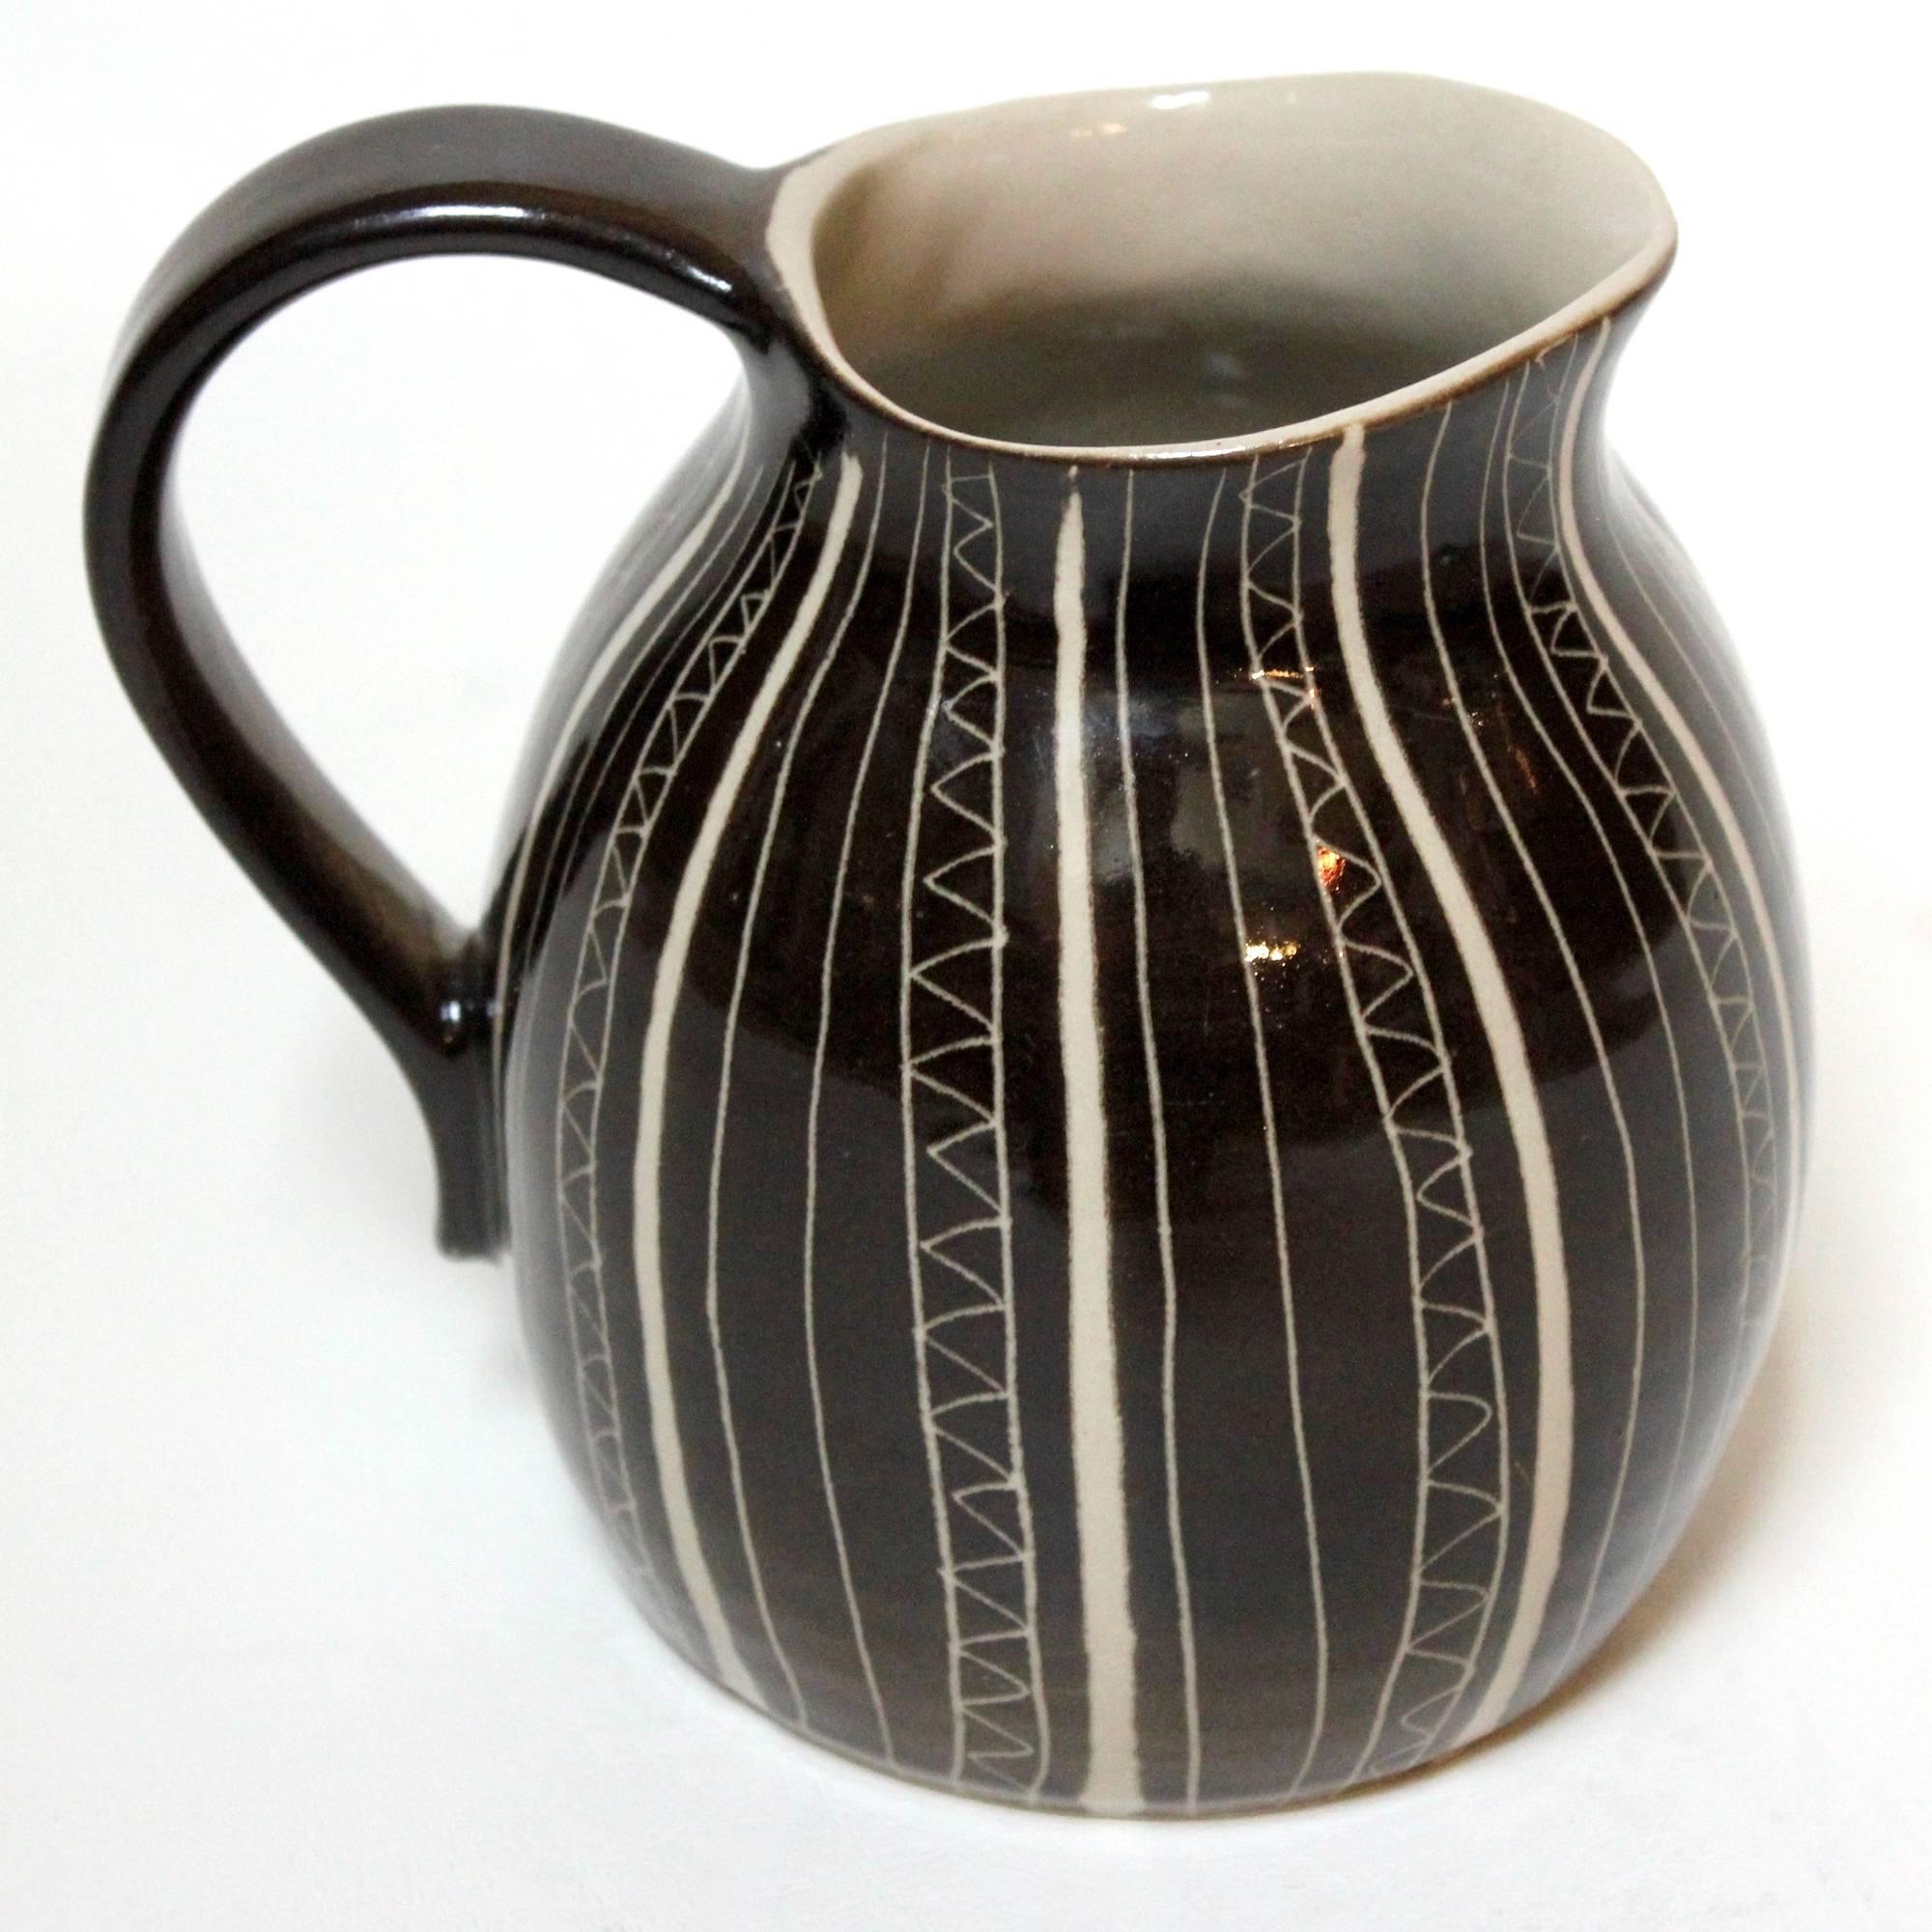 1960s ceramic pitcher by Kaj Franck for Arabia of Finland. In excellent condition, and marked with the Arabia logo and 